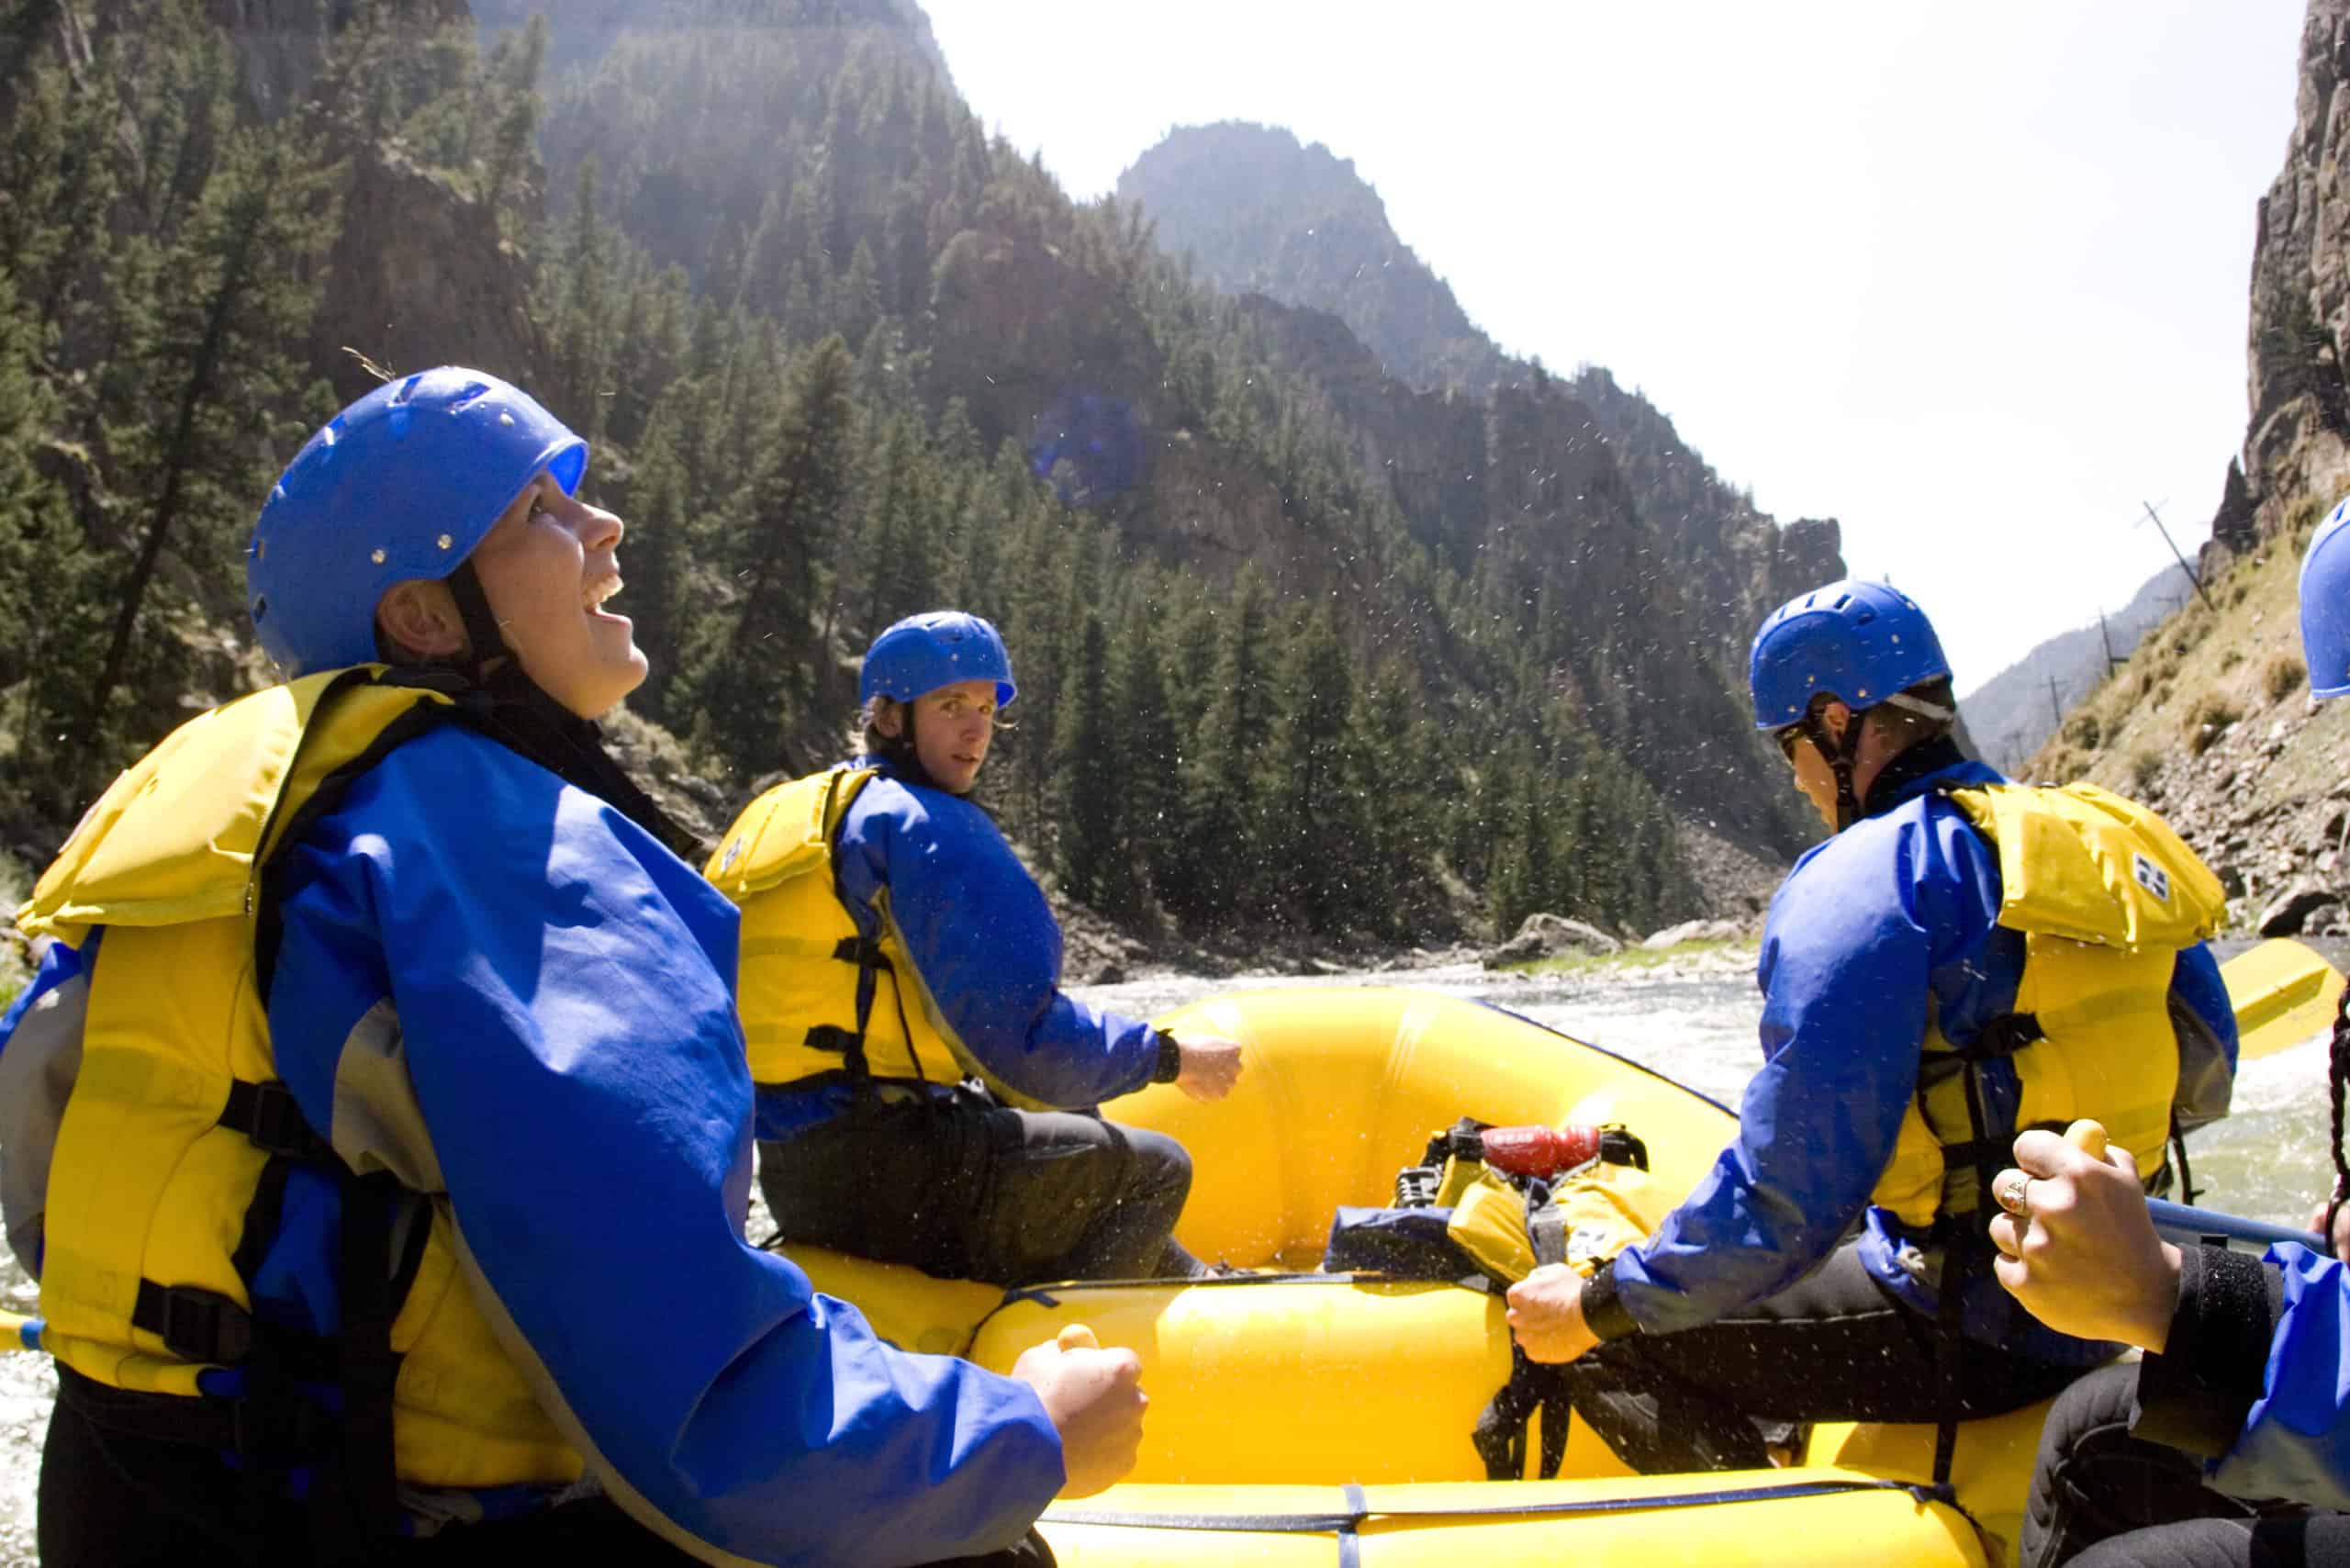 People Smiling while rafting